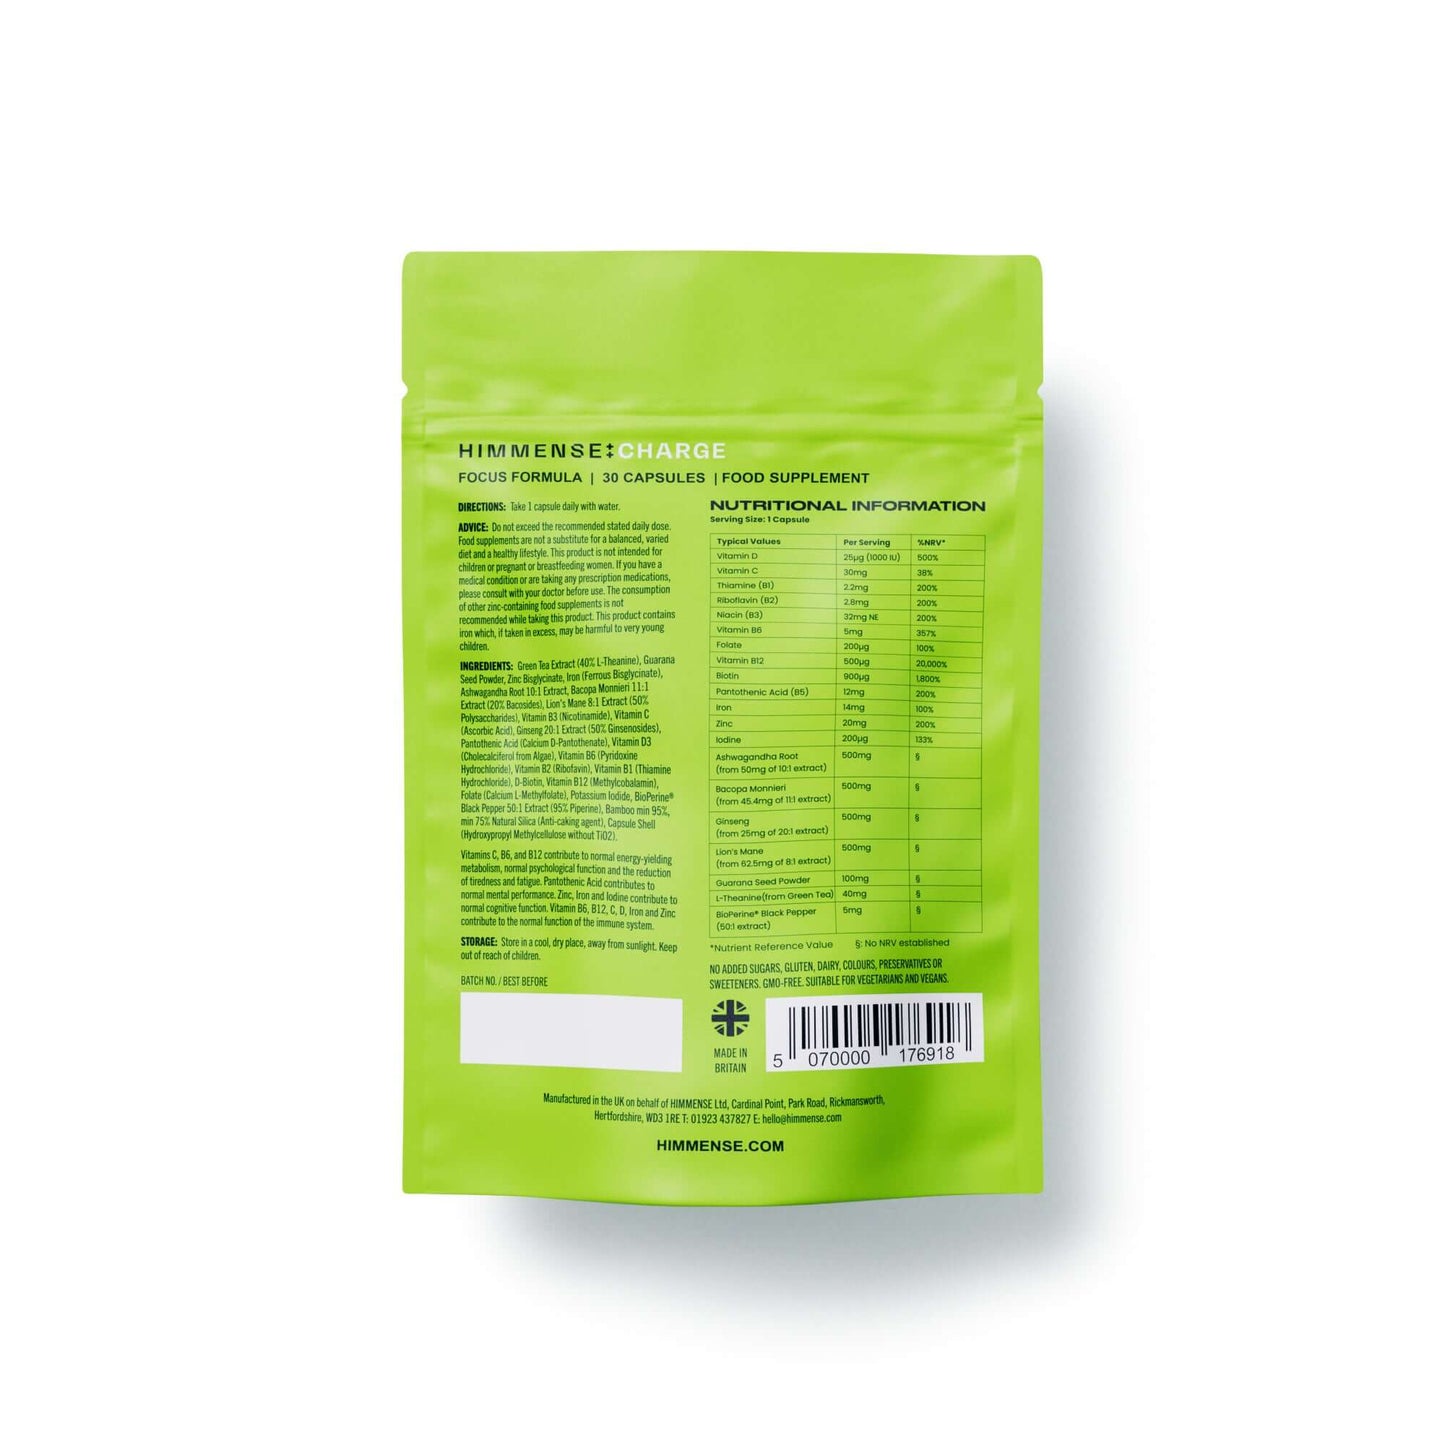 Back of CHARGE supplement package showing nutritional information and ingredients.